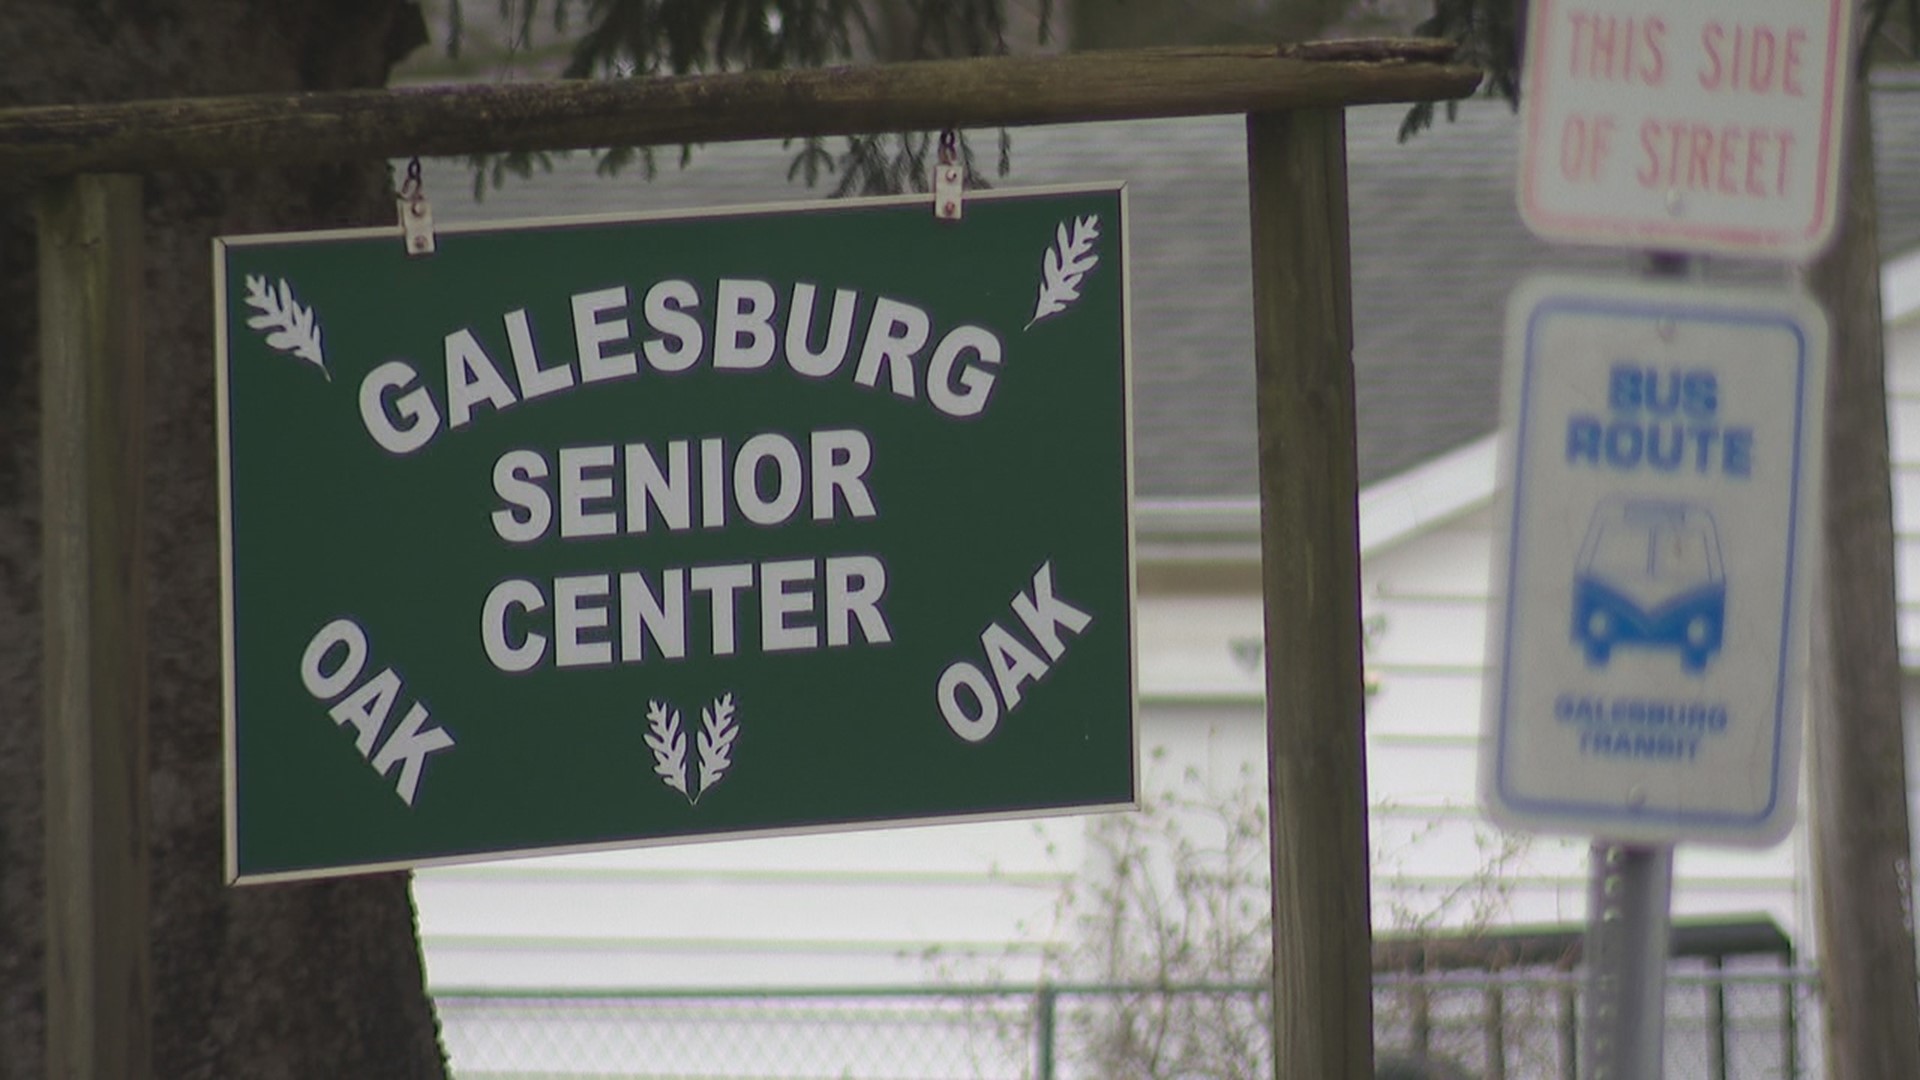 News 8's Morgan Strackbein introduces viewers to Mary Johnson, who helps residents at the Oaks Senior Center in Galesburg rediscover their community.